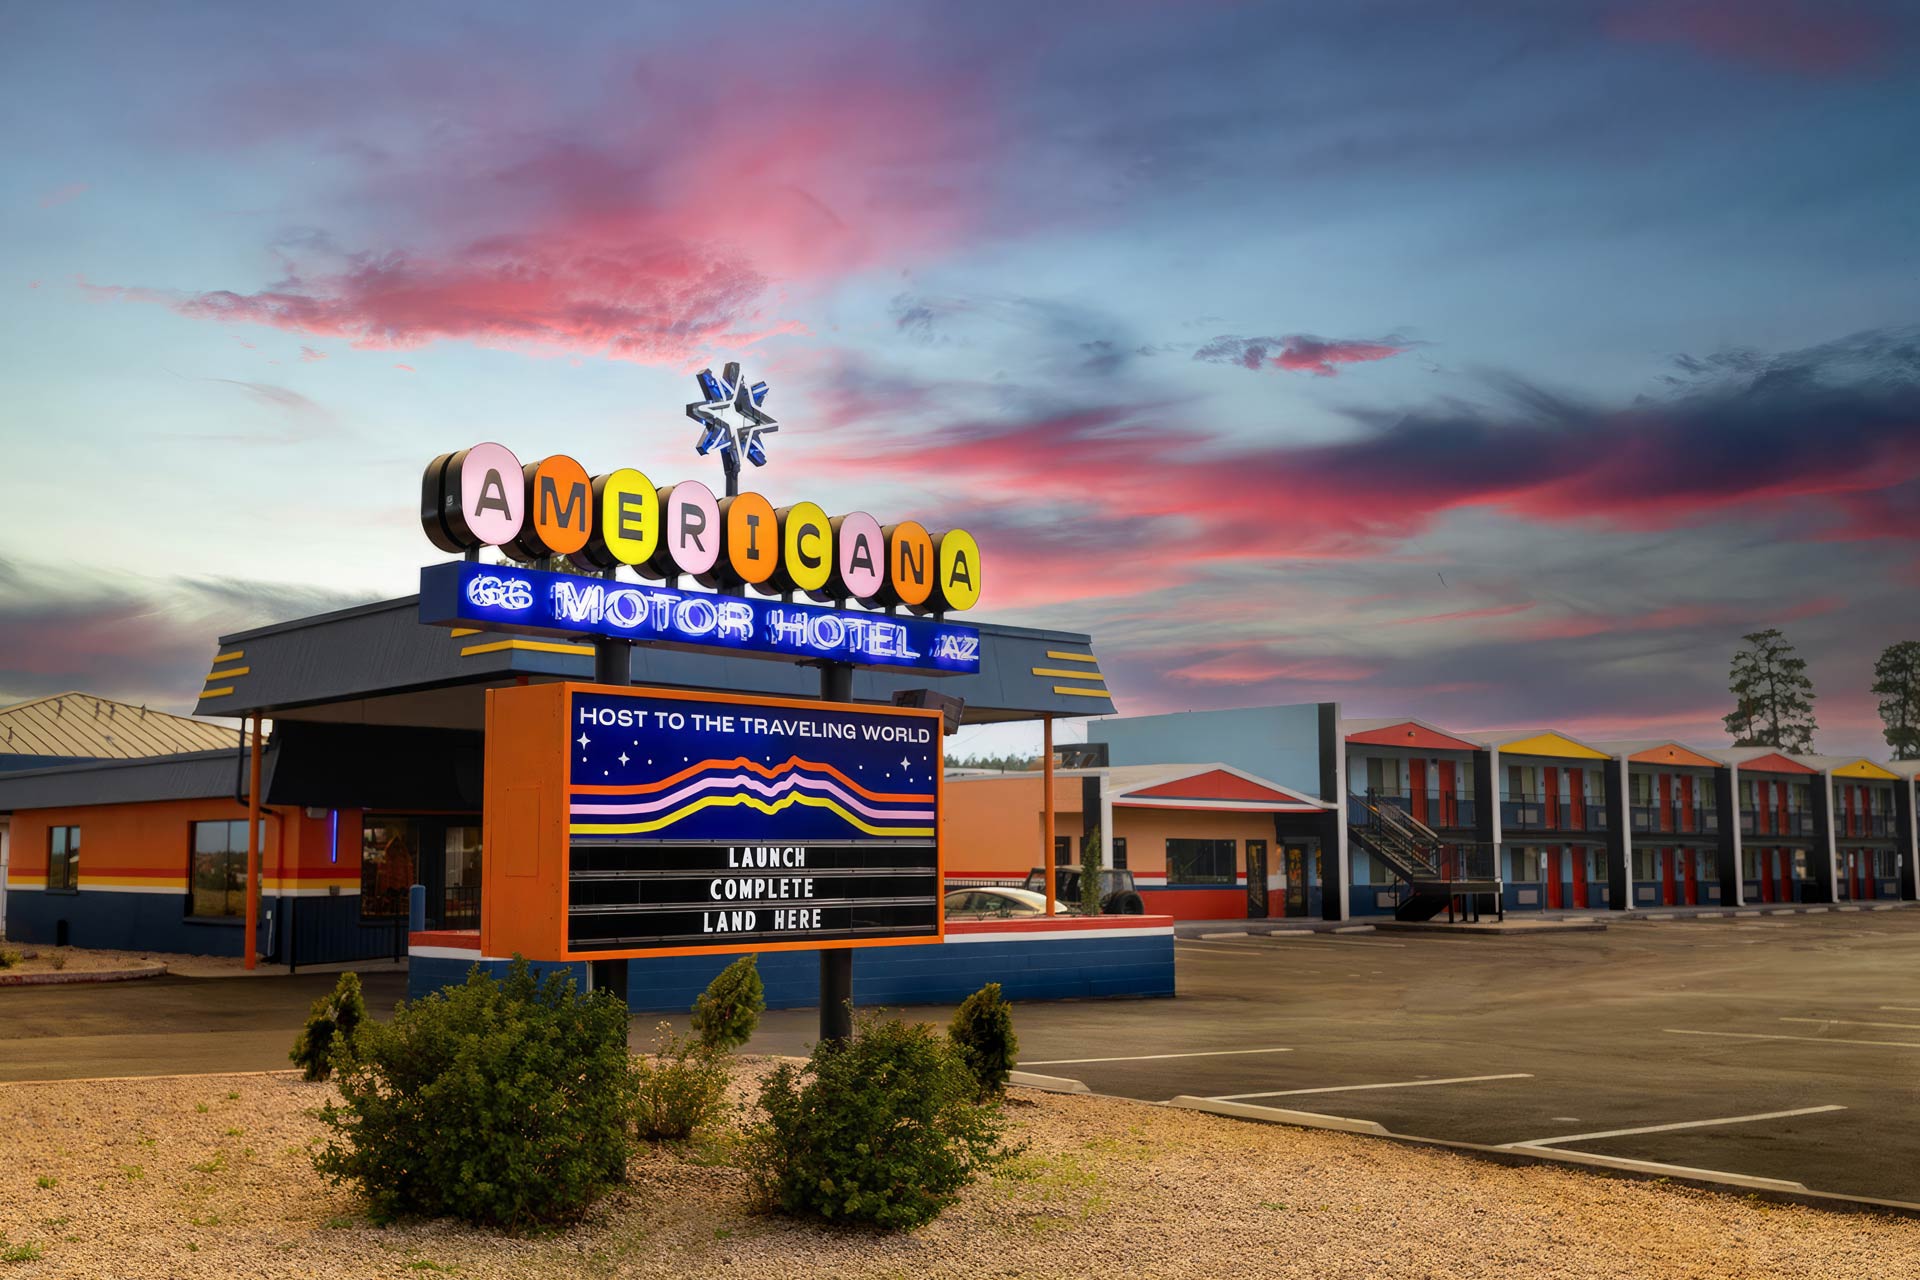 Retro-futuristic motor hotel reopening on Route 66 - Sleeper